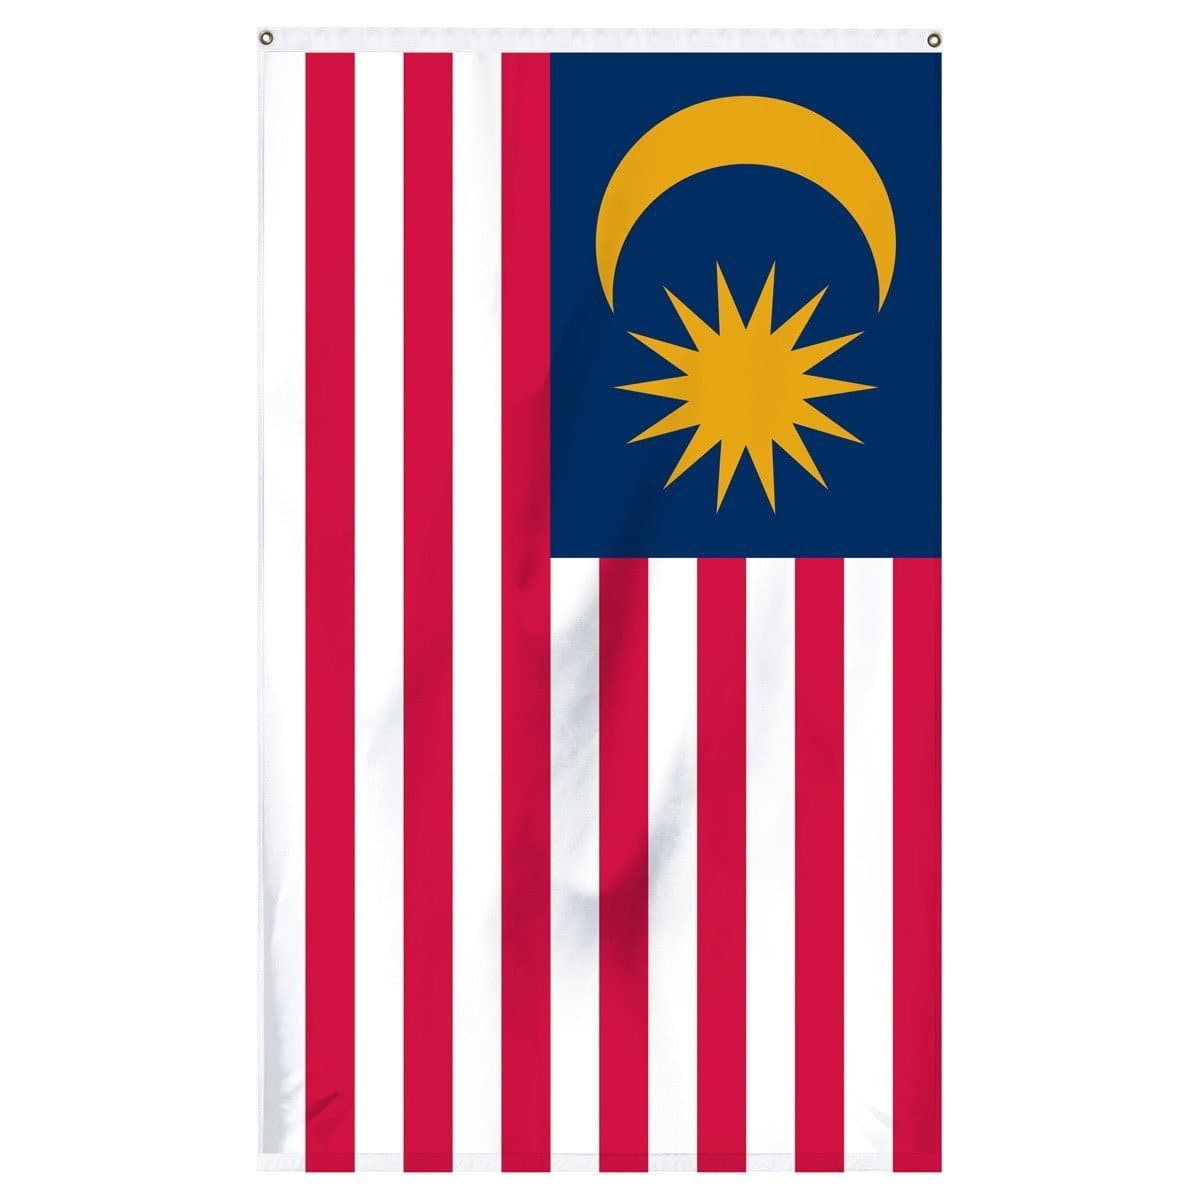 The national flag of Malaysia for flagpoles for sale to buy online